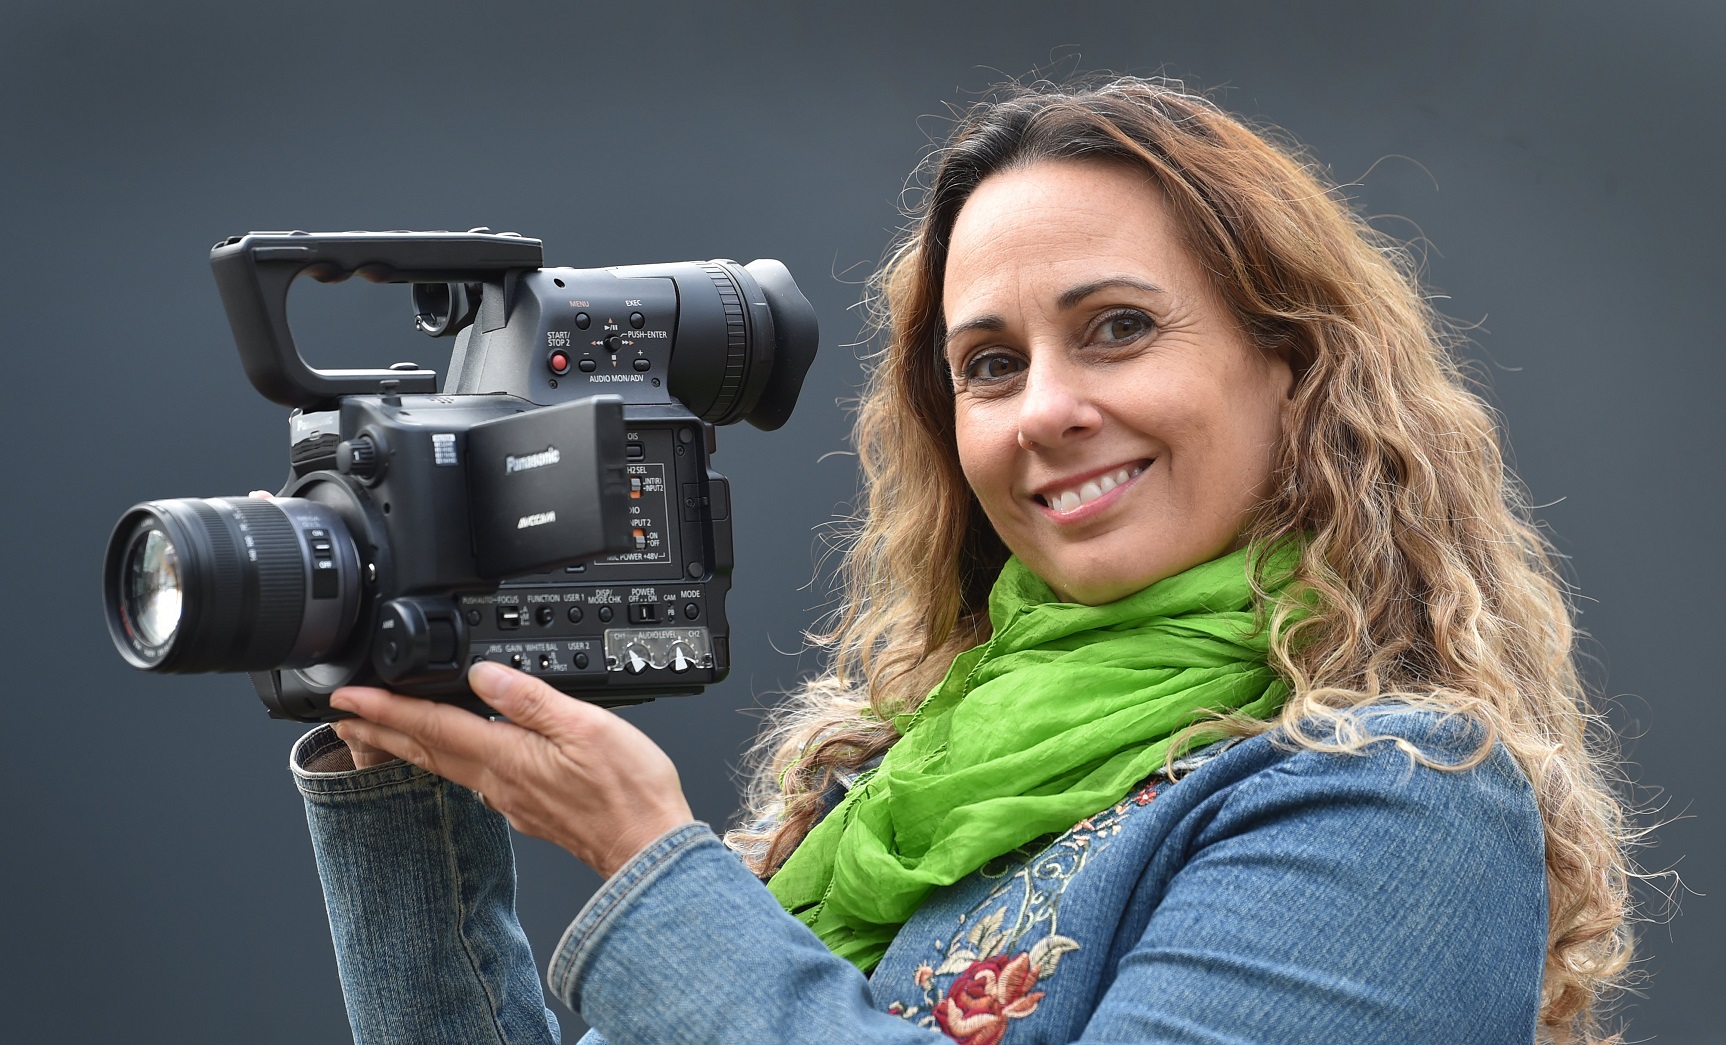 Master of Science Communications course convener Dr Gianna Savoie says this year’s final film...